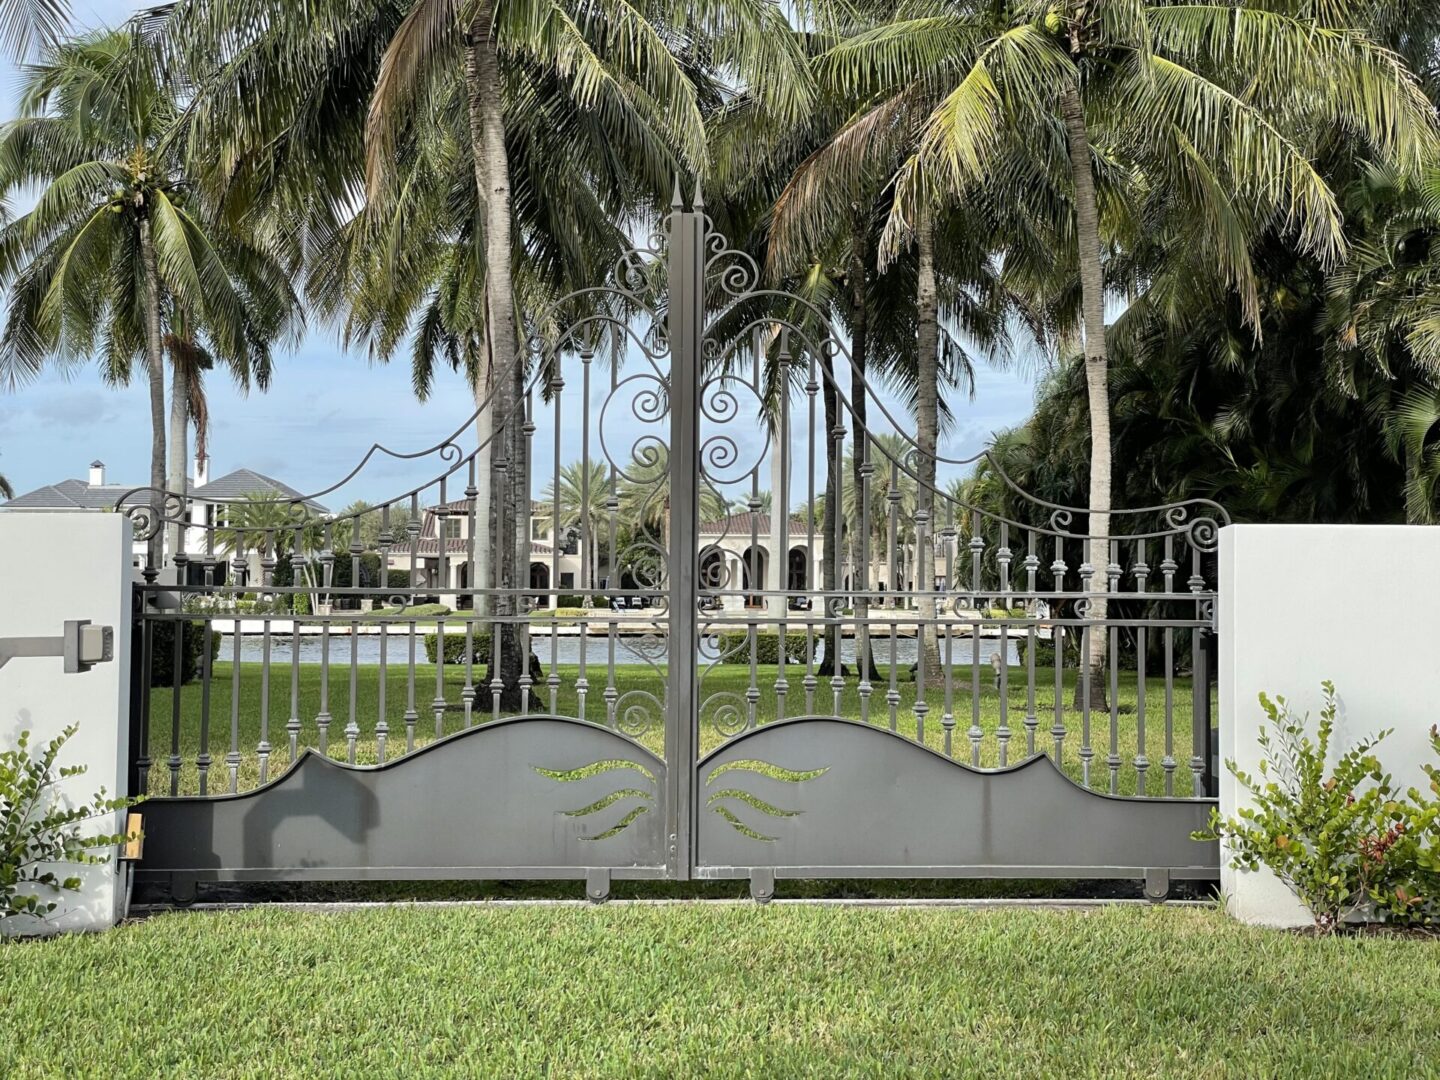 A gated yard with palm trees and a pool.